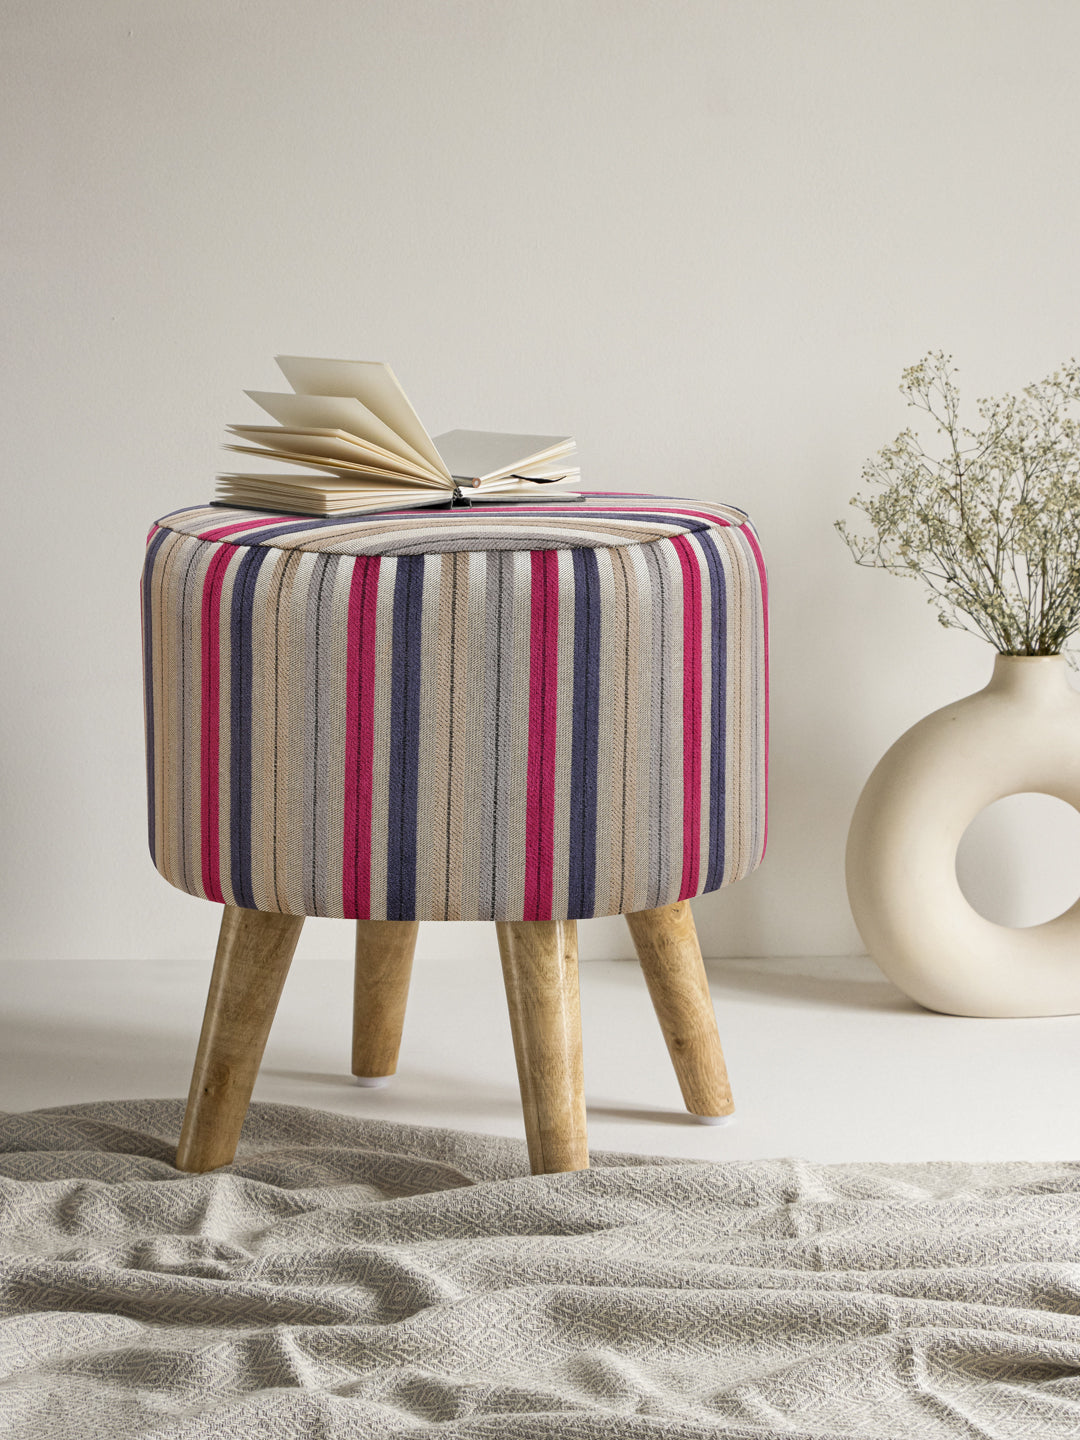 Stool With Wooden Legs; Multicolor Lines